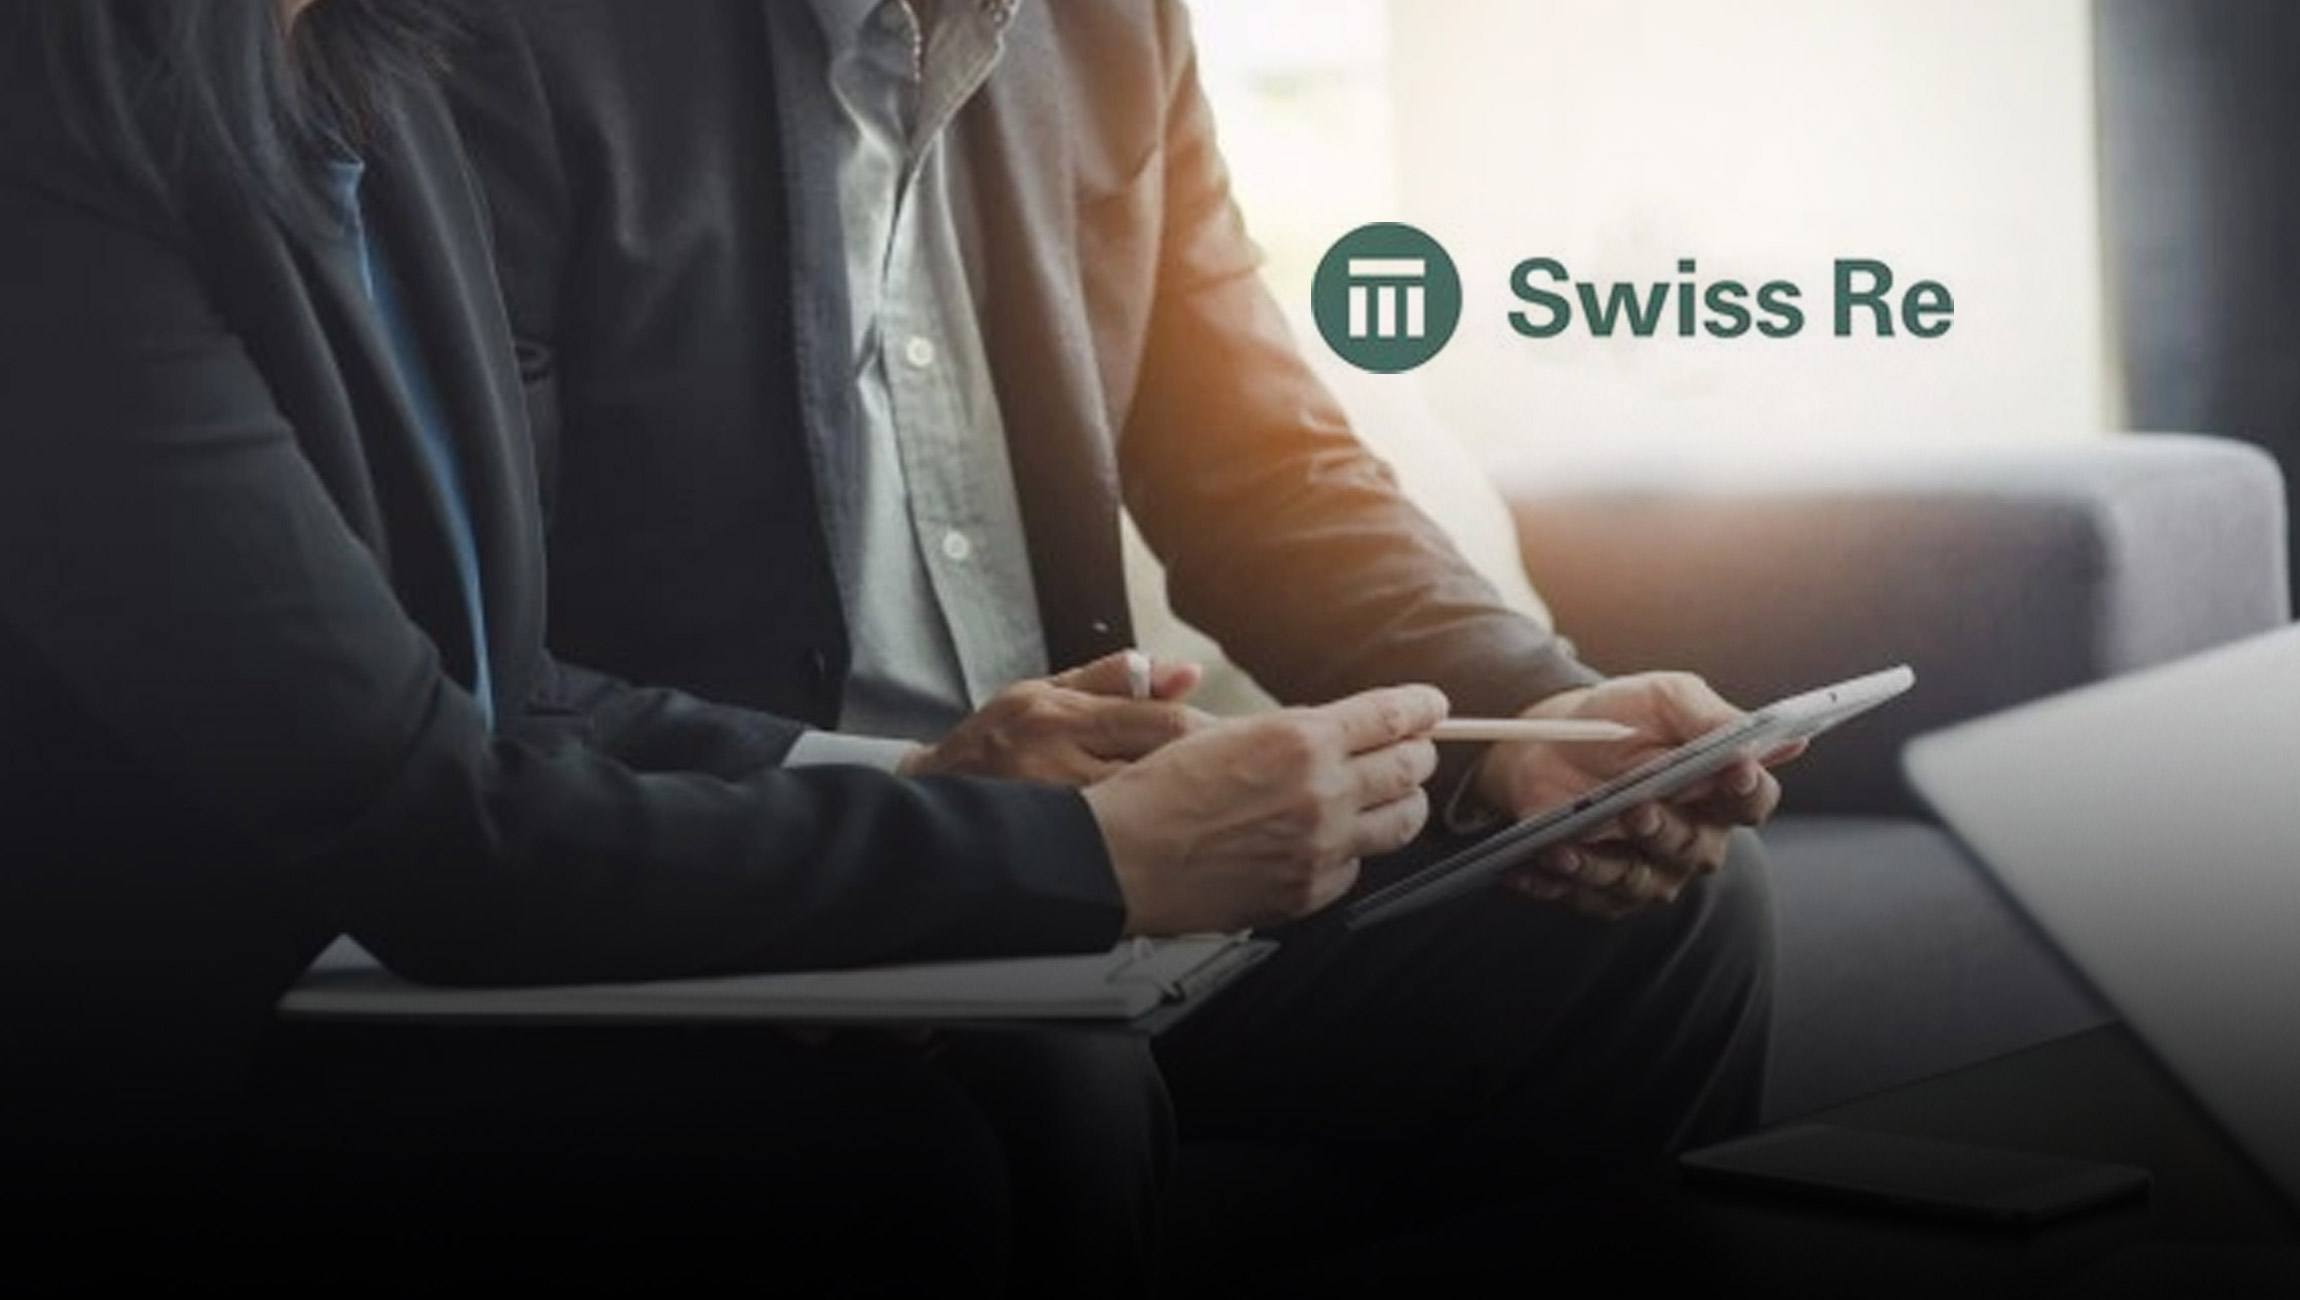 Swiss Re Corporate Solutions Surety Launches DocuSign eSignature for General Indemnity Agreements